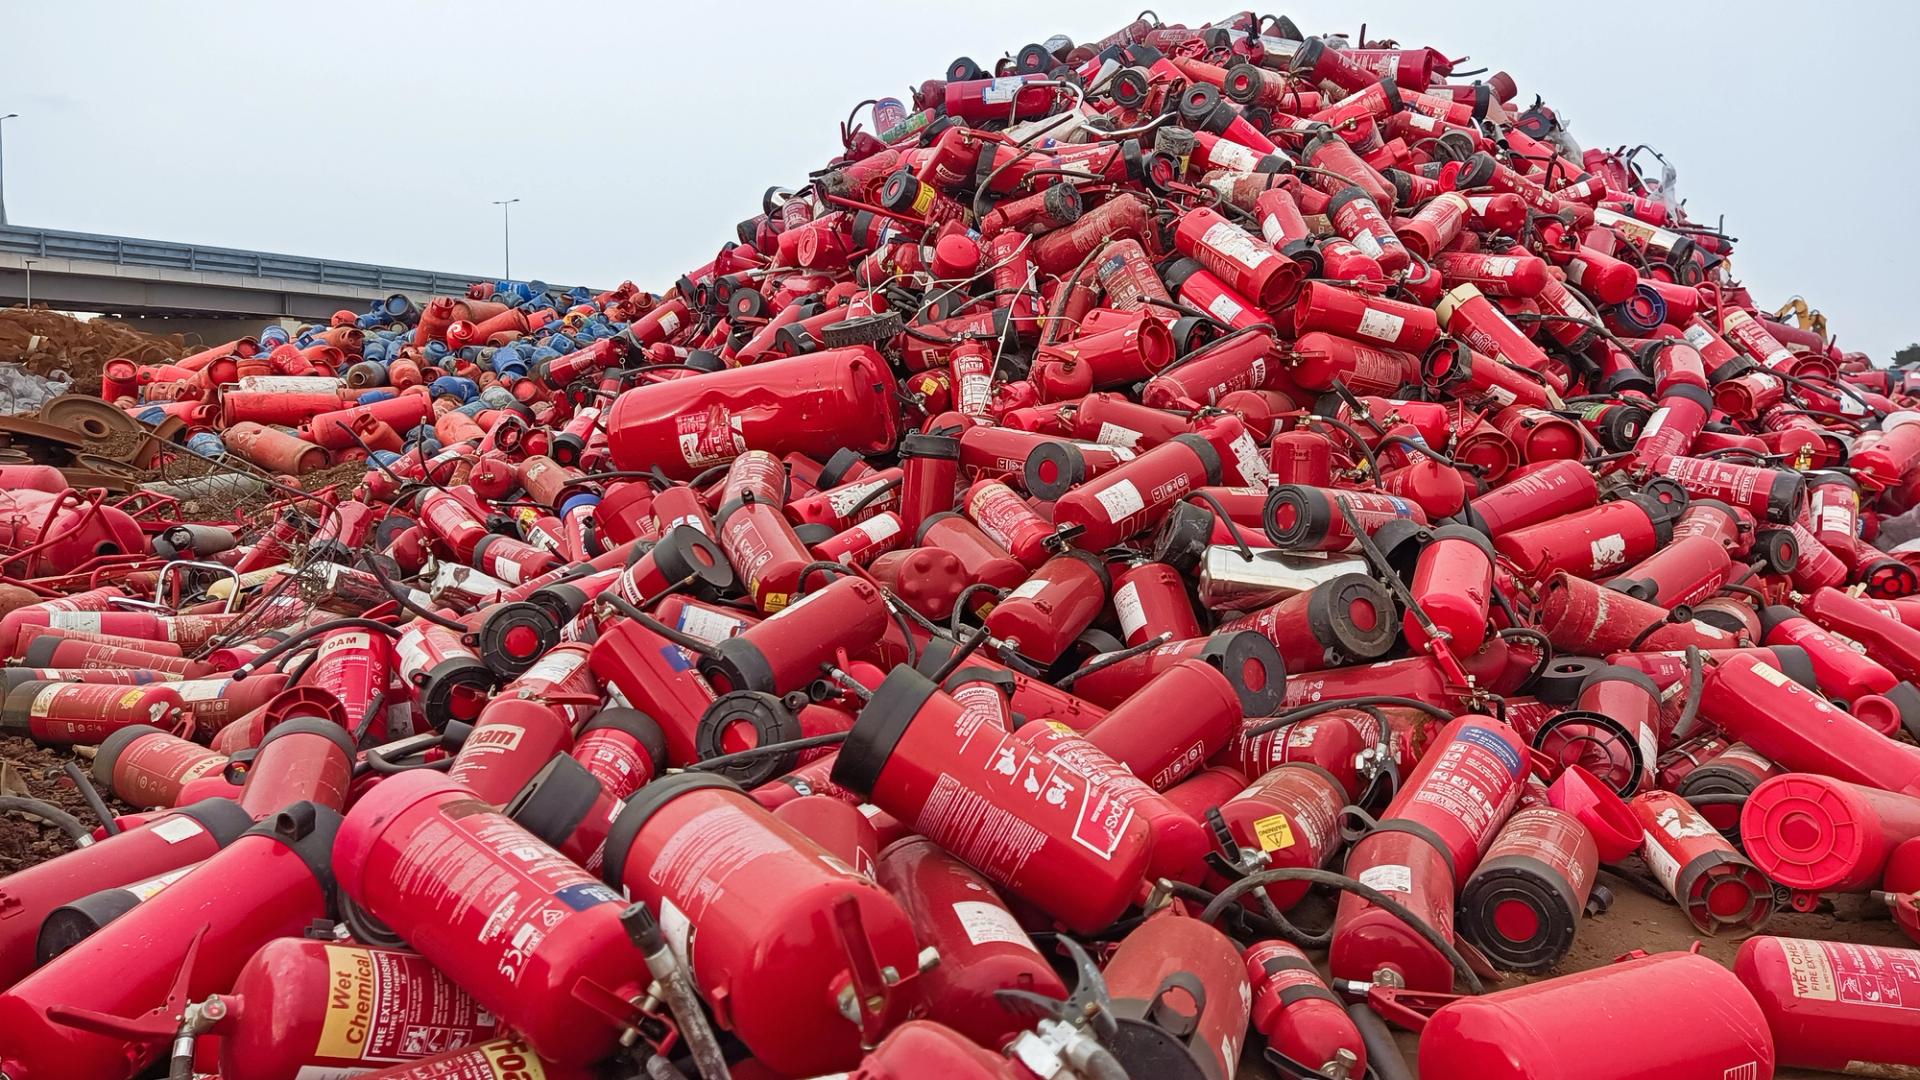 Huge pile of used fire extiguishers